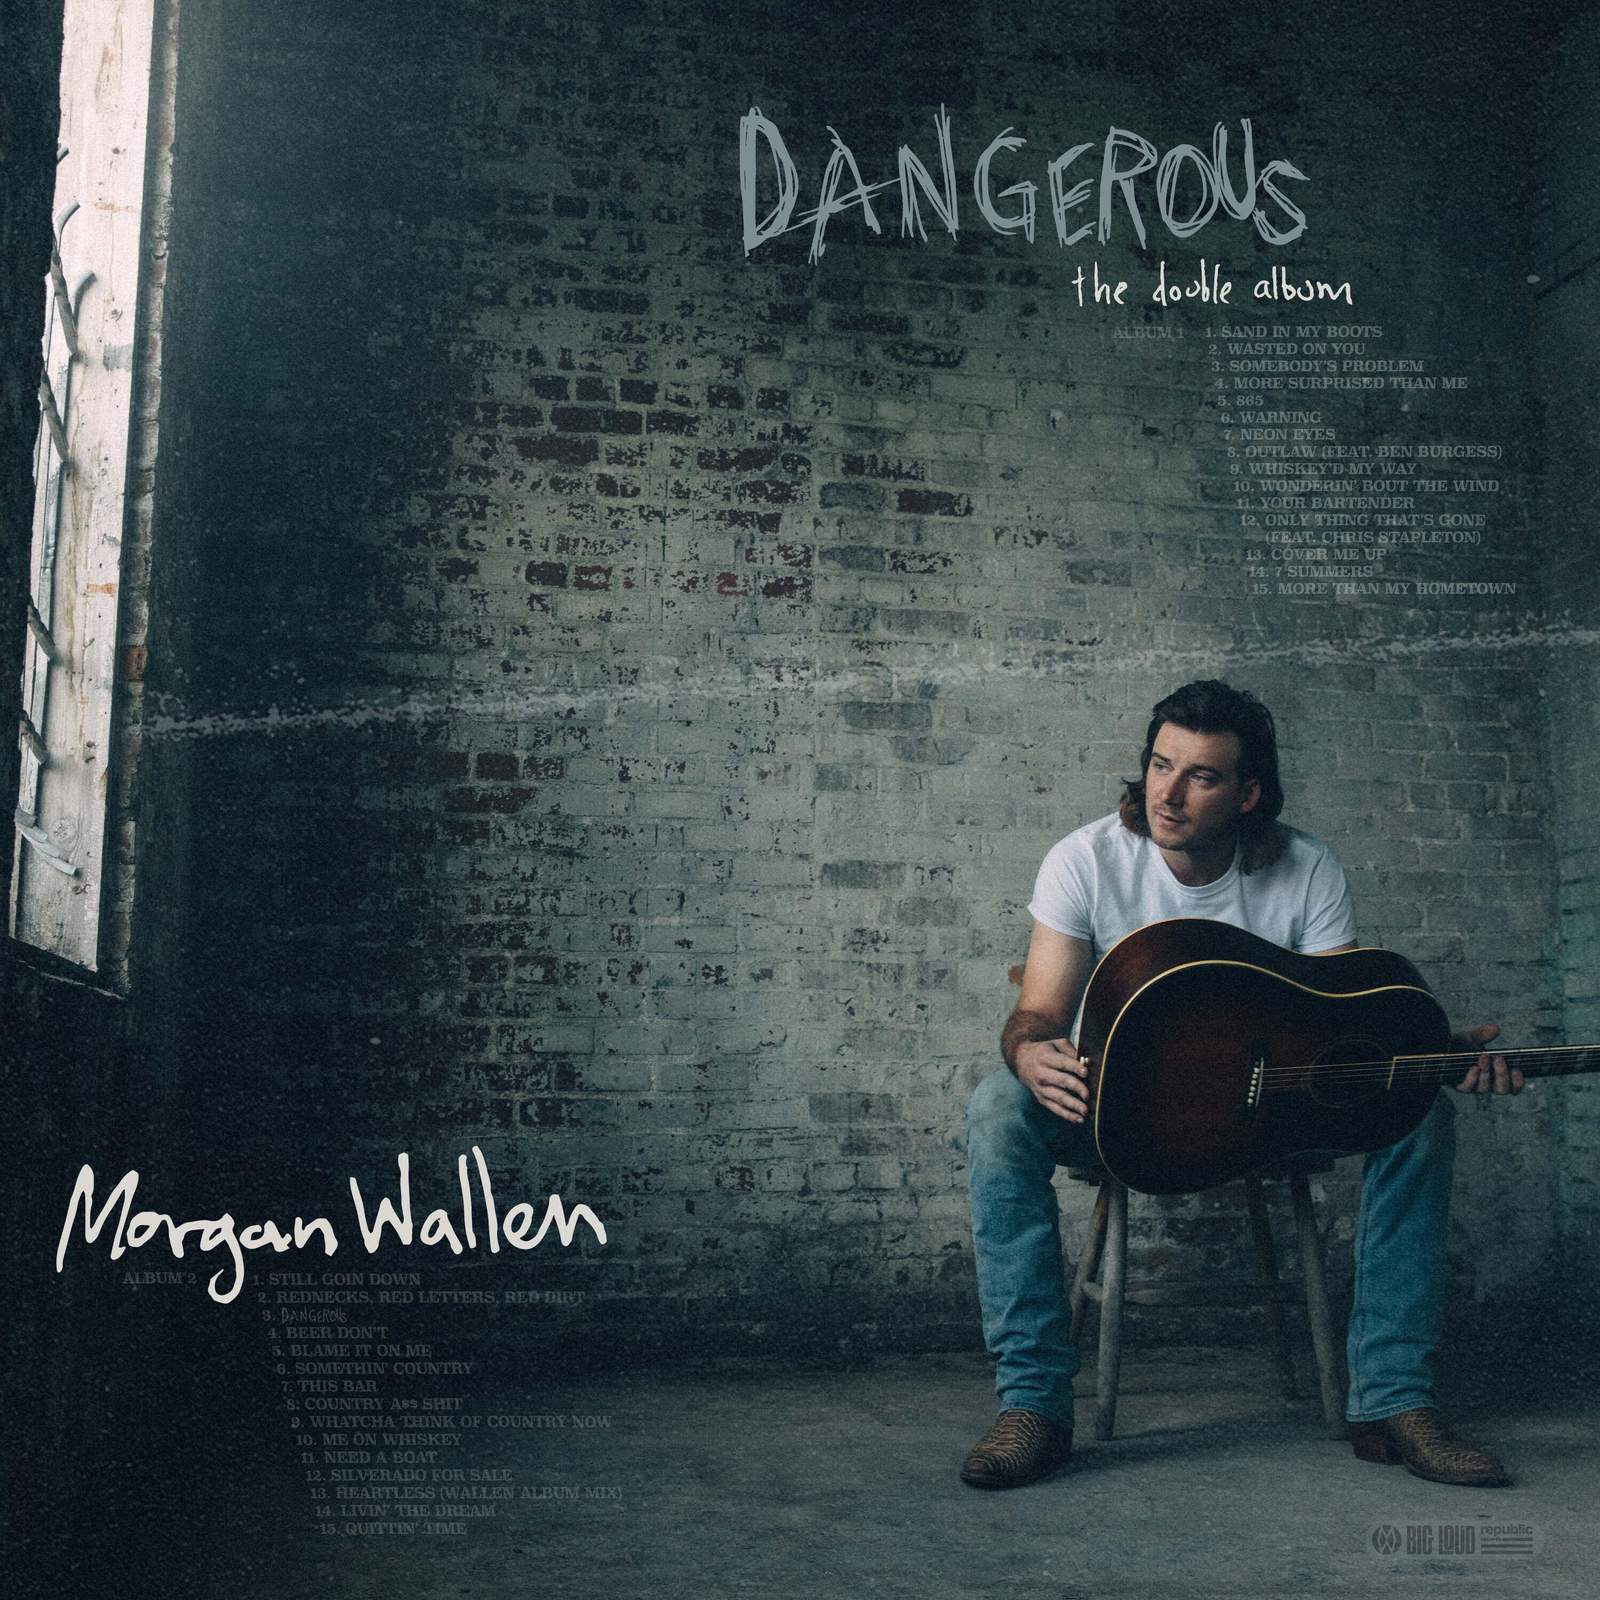 New this week: Morgan Wallen music, tiger cubs and 'Herself'